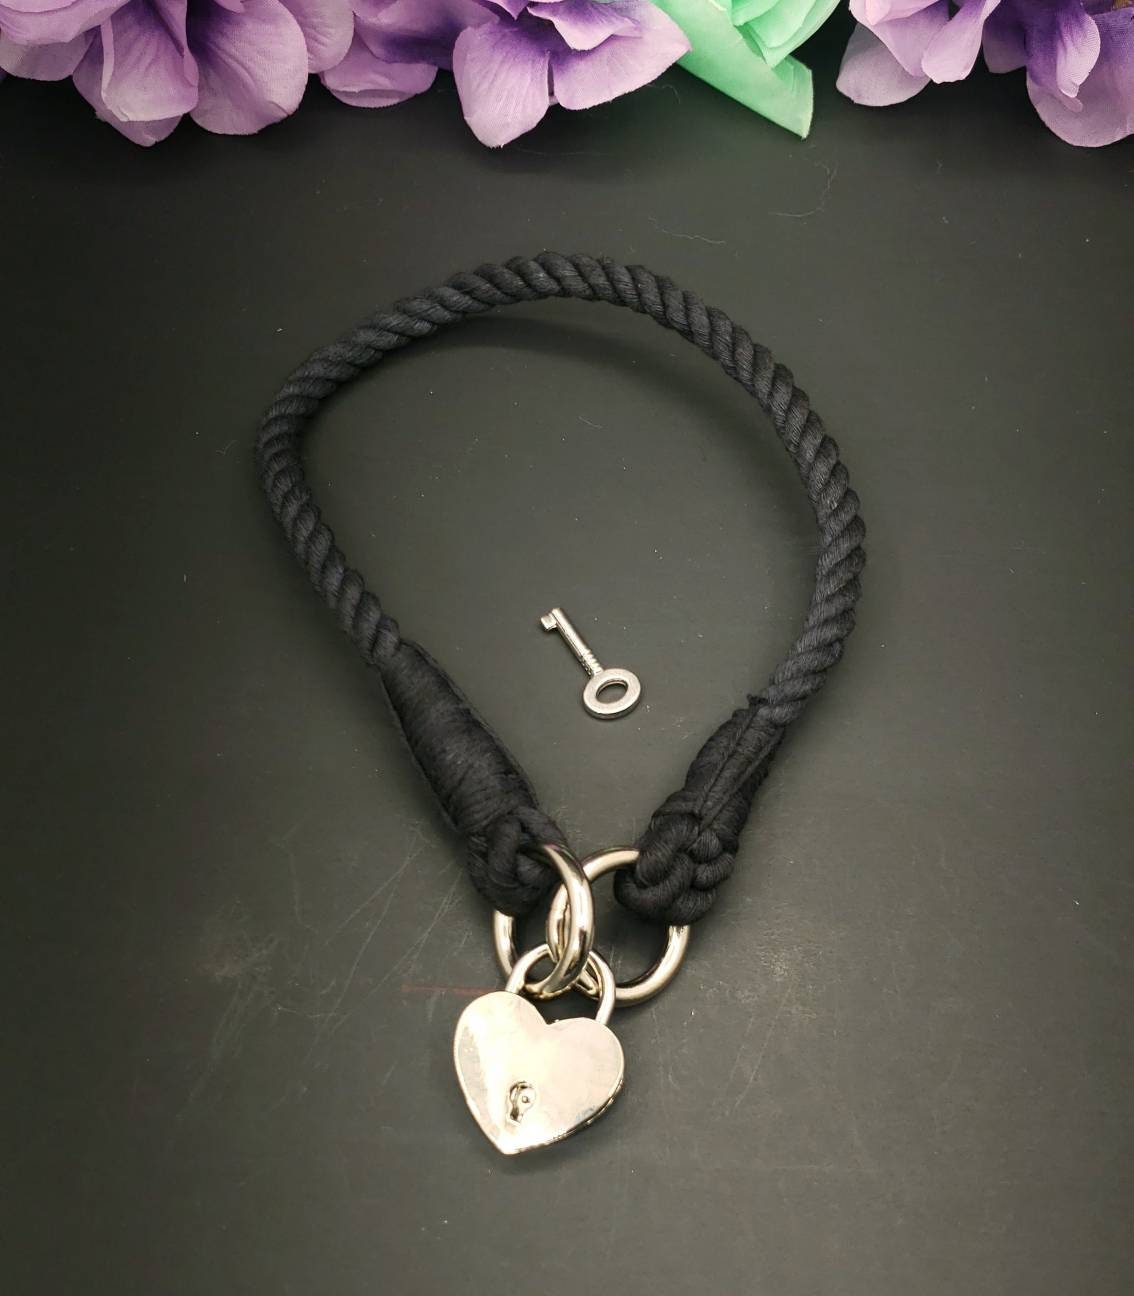 Black Heart Locking Collar - BDSM Rope Choker - Submissive Cotton Collar | Novelty Choker Accessory for Roleplay